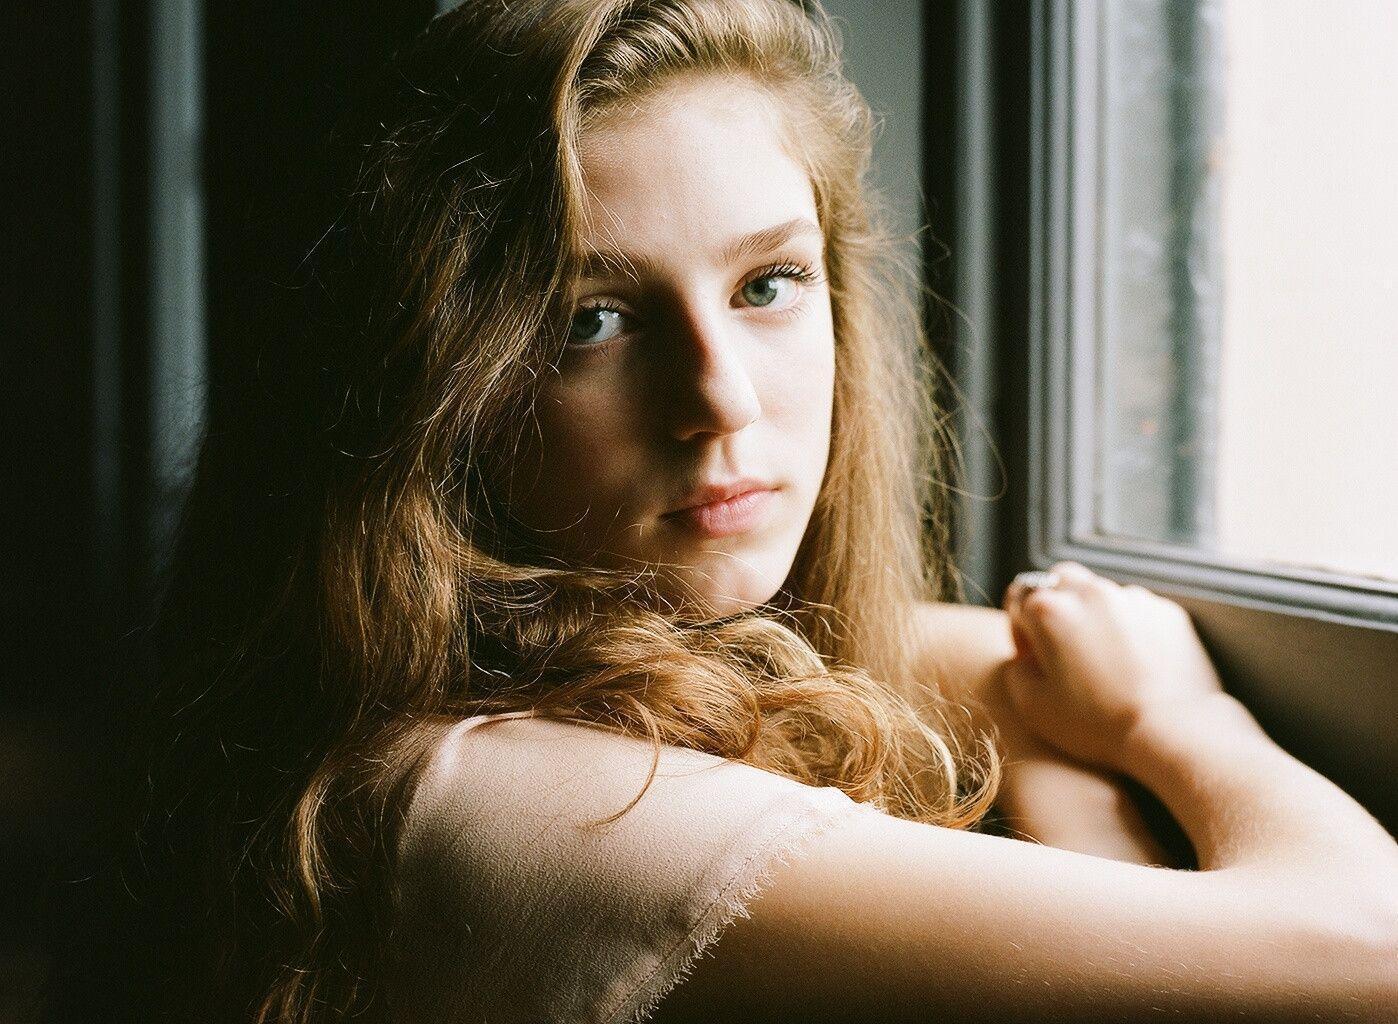 The 15 Year Old British Singer Songwriter Birdy Will Release “Live